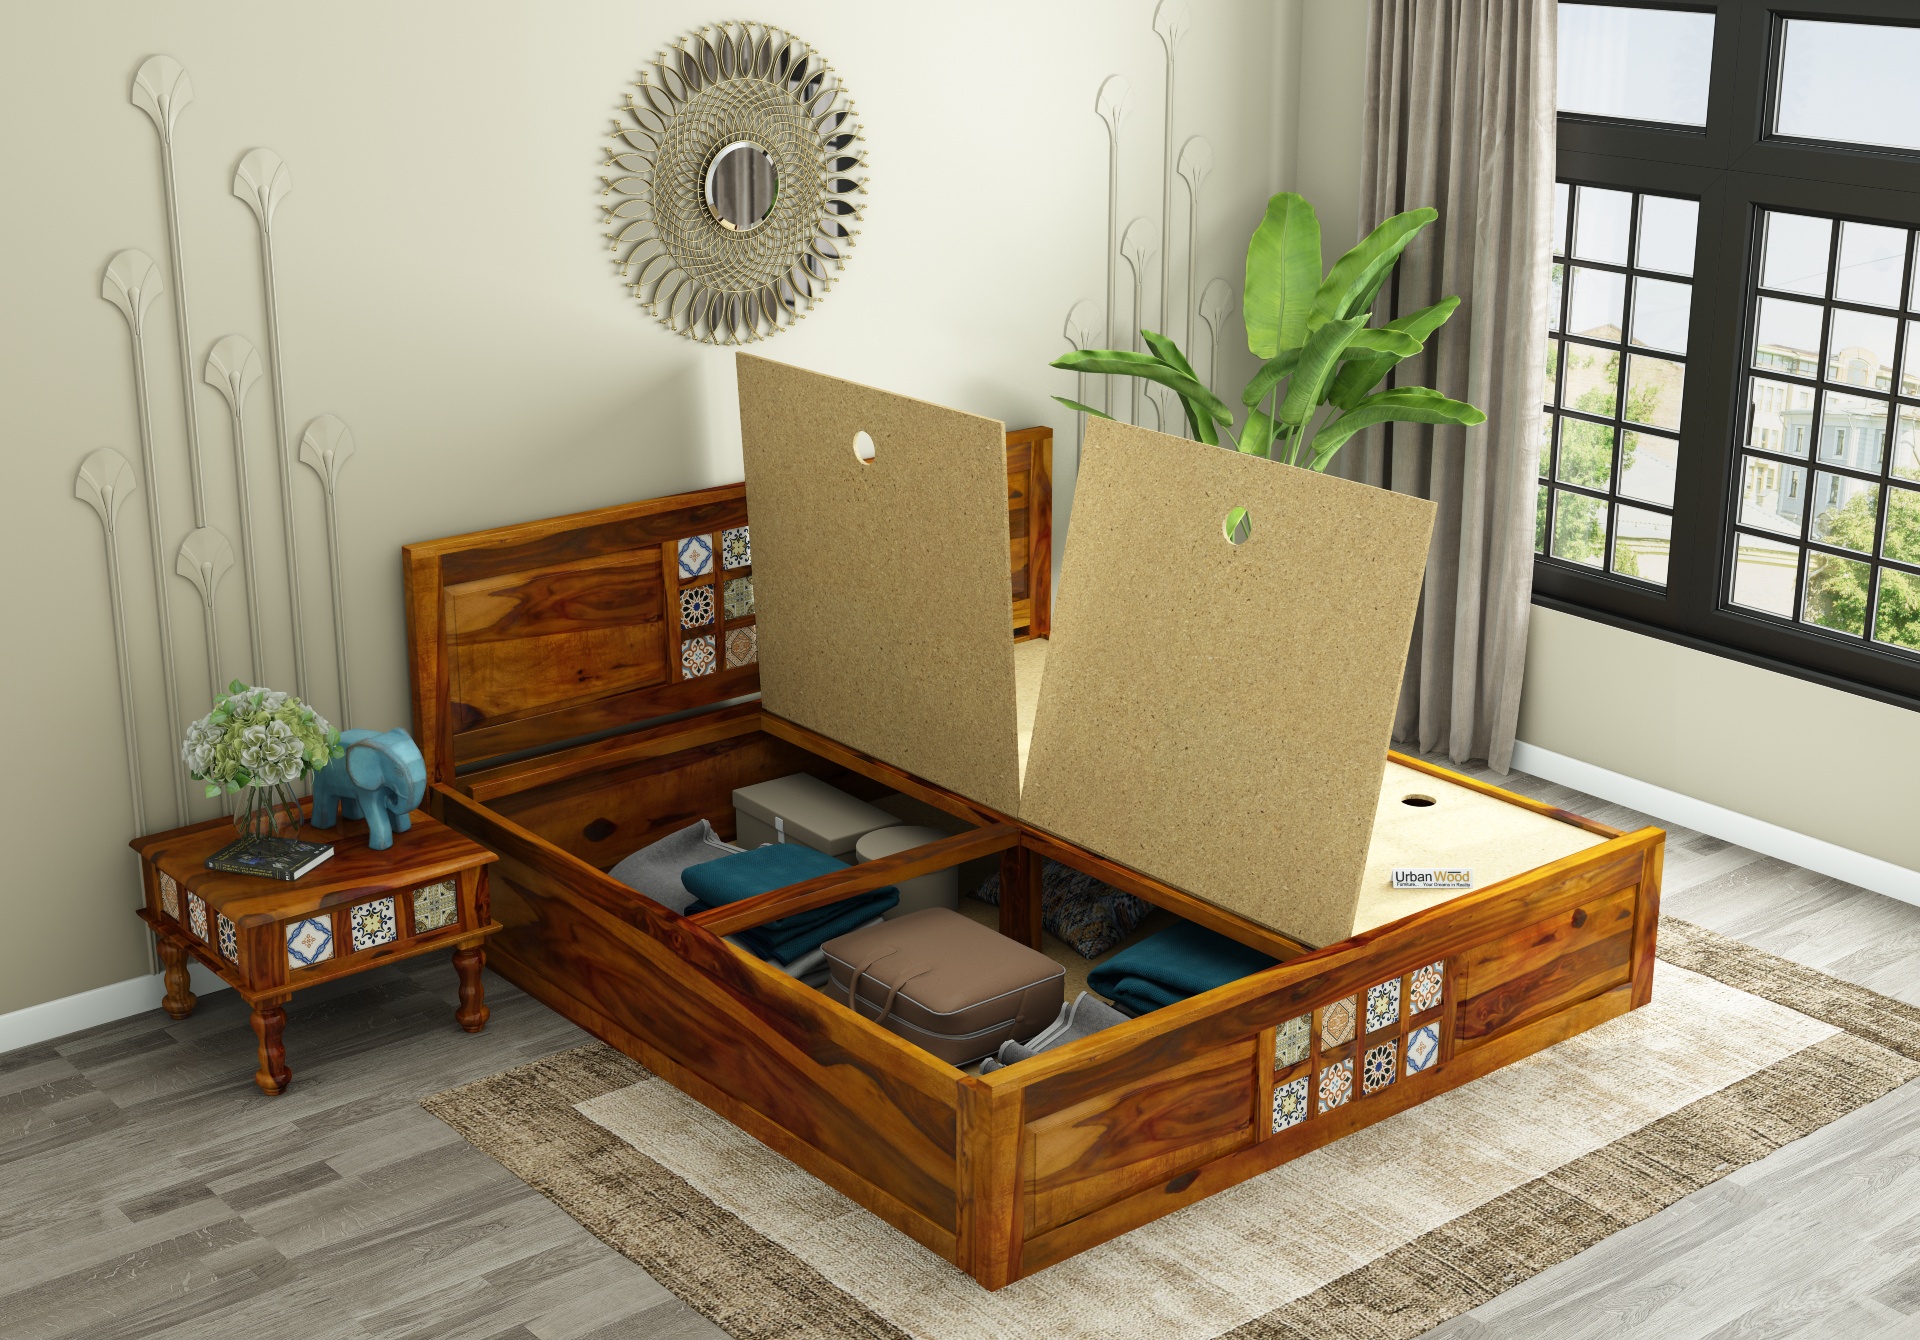 Relay Wooden Bed with Box Storage ( Queen Size, Honey Finish )